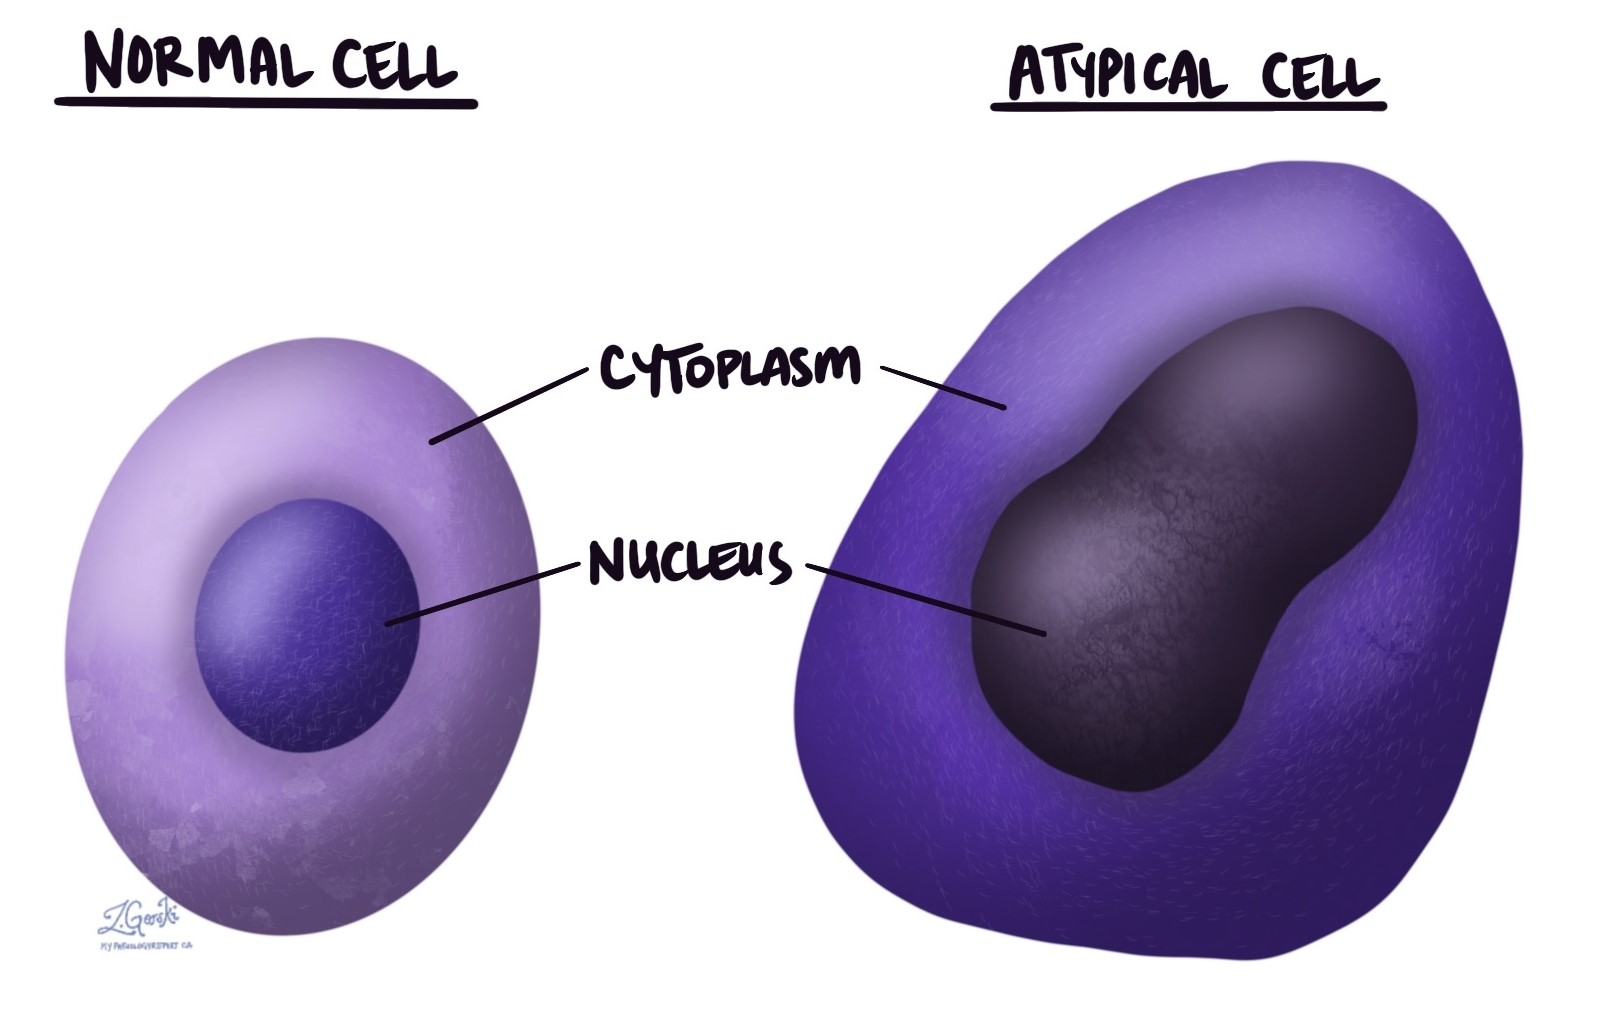 Atypical cell